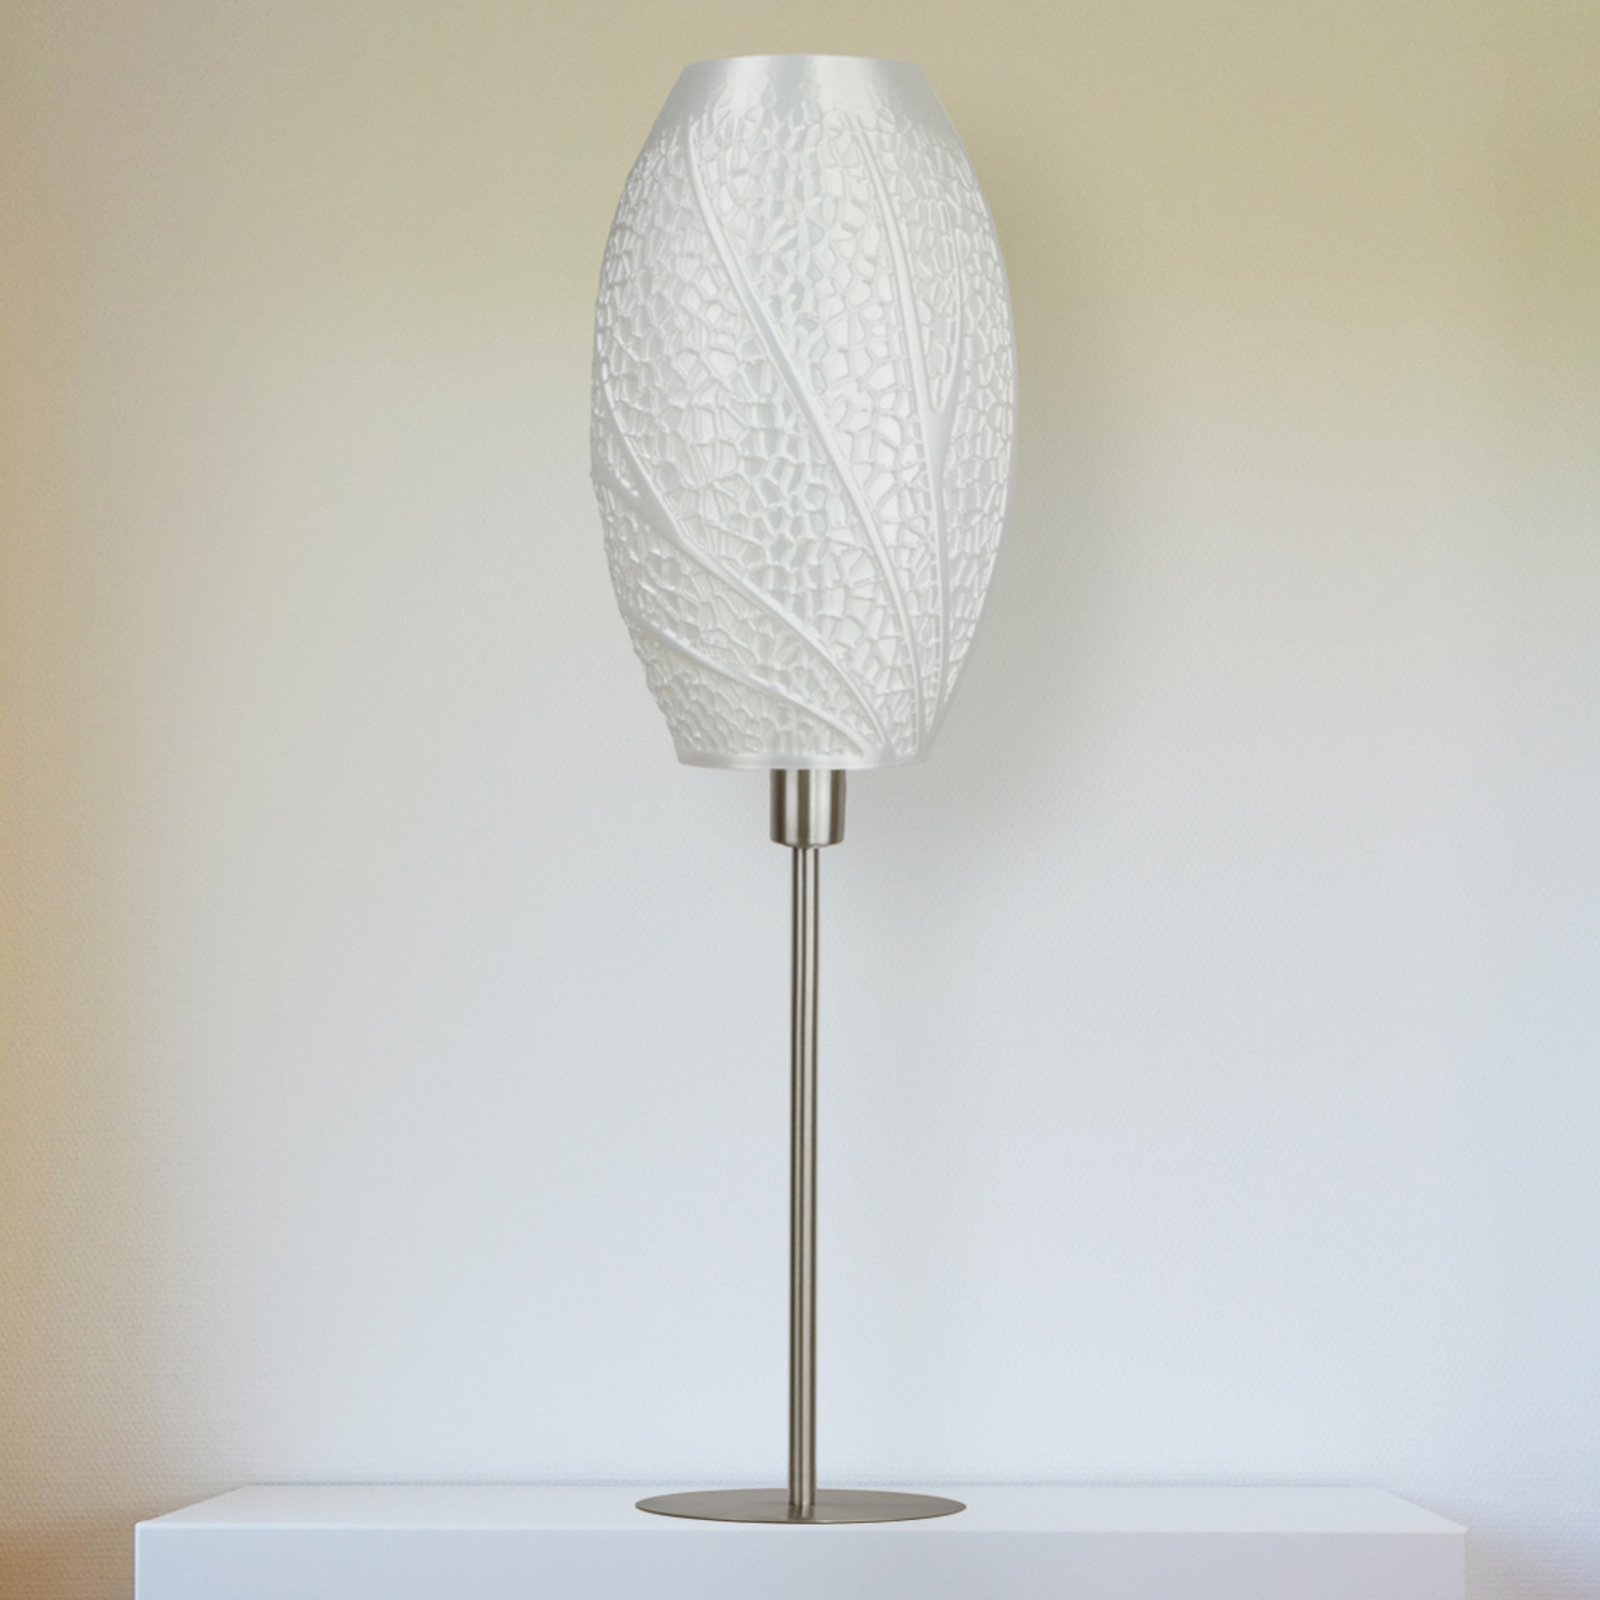 3d Printed Flora Table Lamp Lights Co Uk, Printed Table Lamp